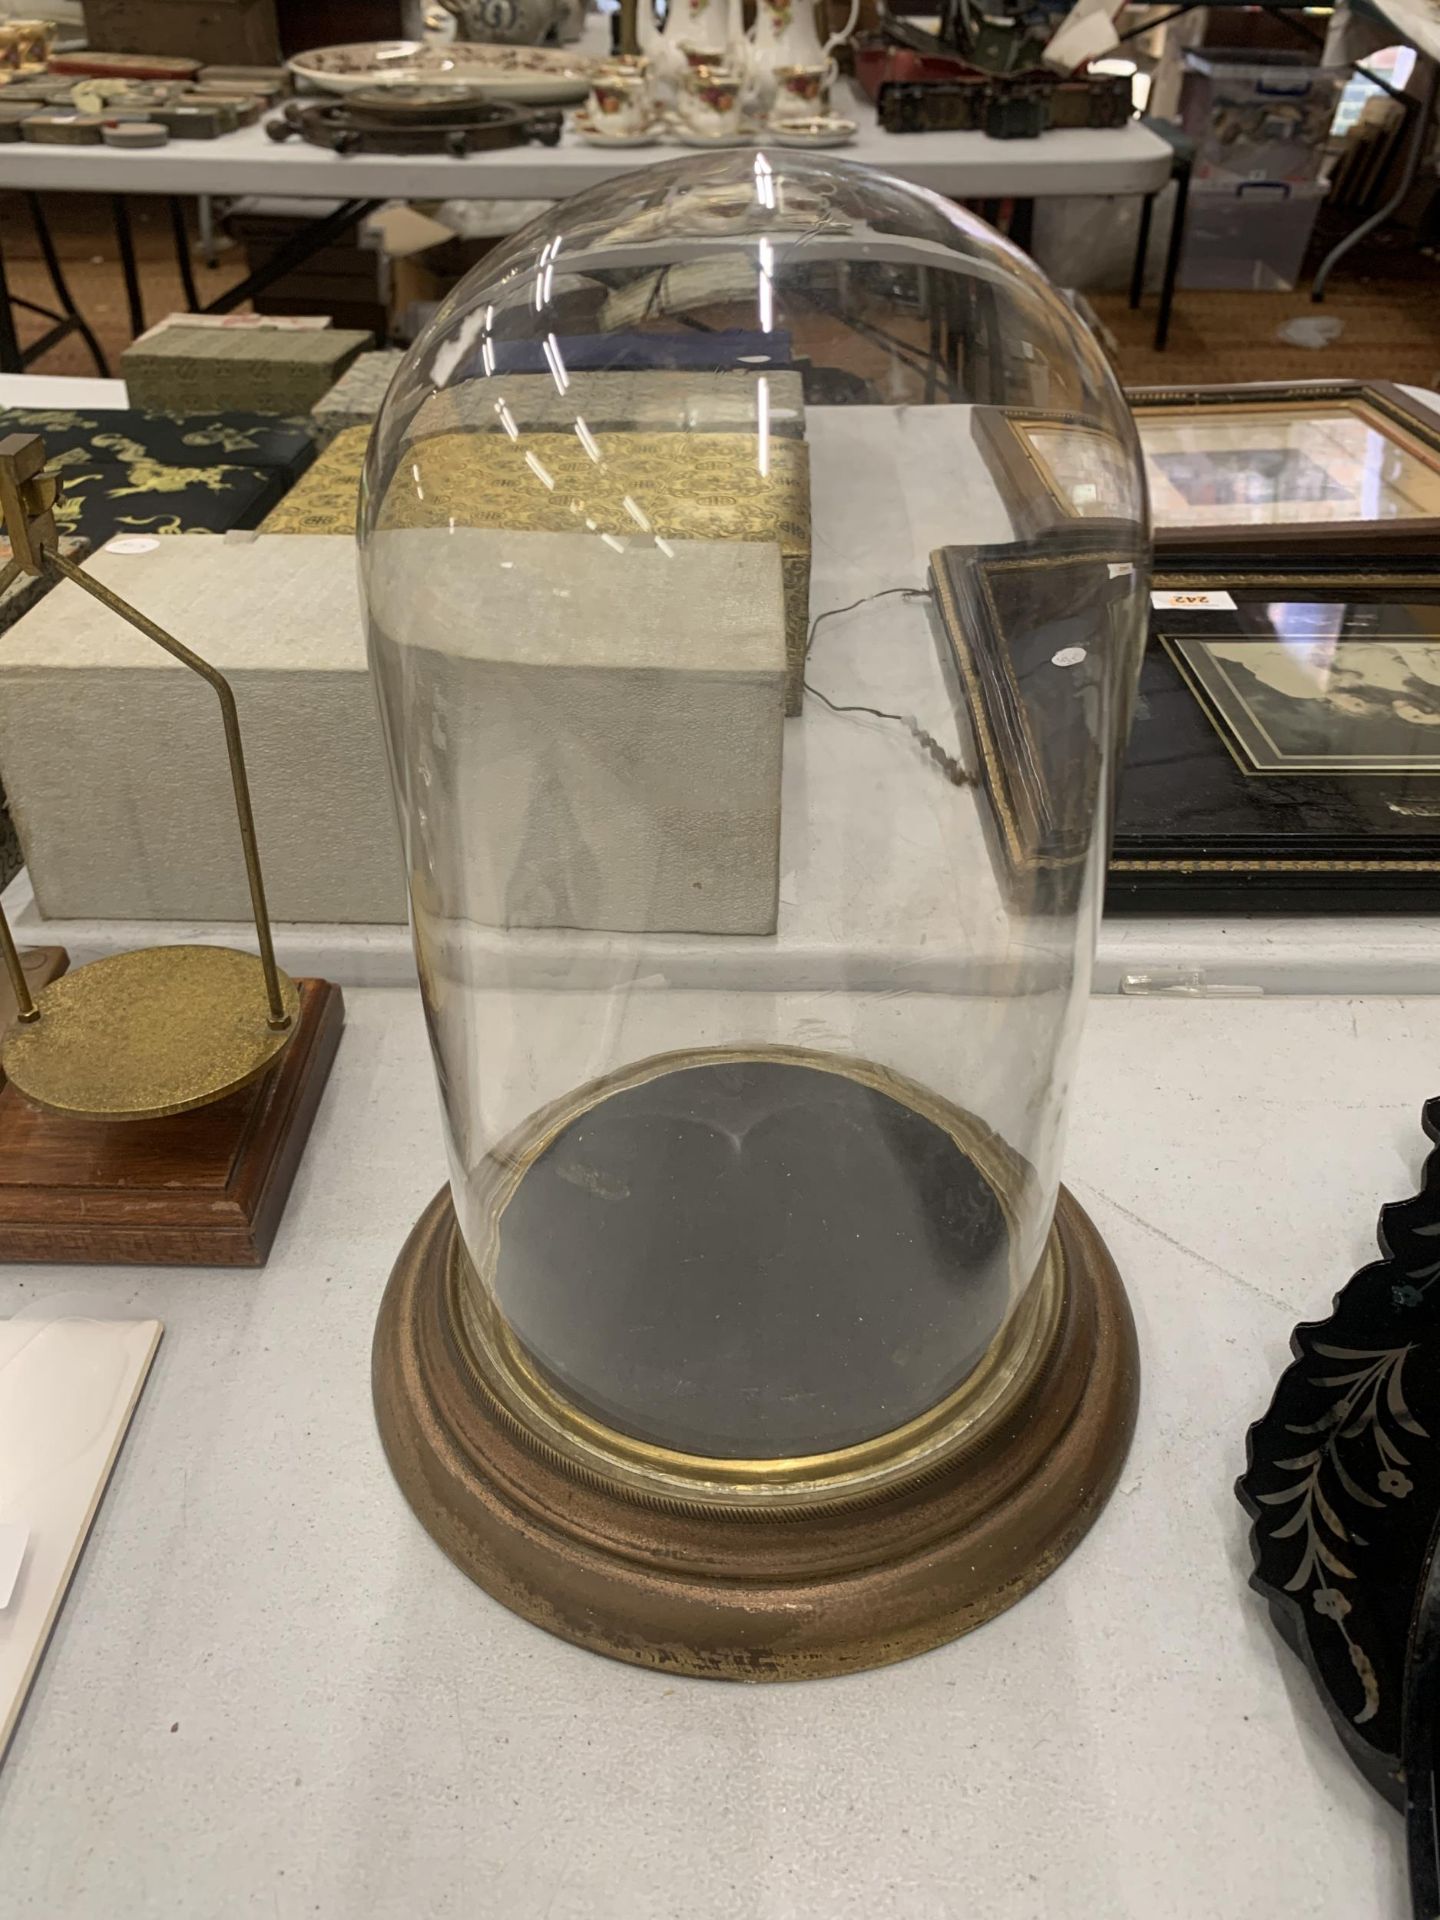 A GLASS DISPLAY DOME WITH A WOODEN BASE